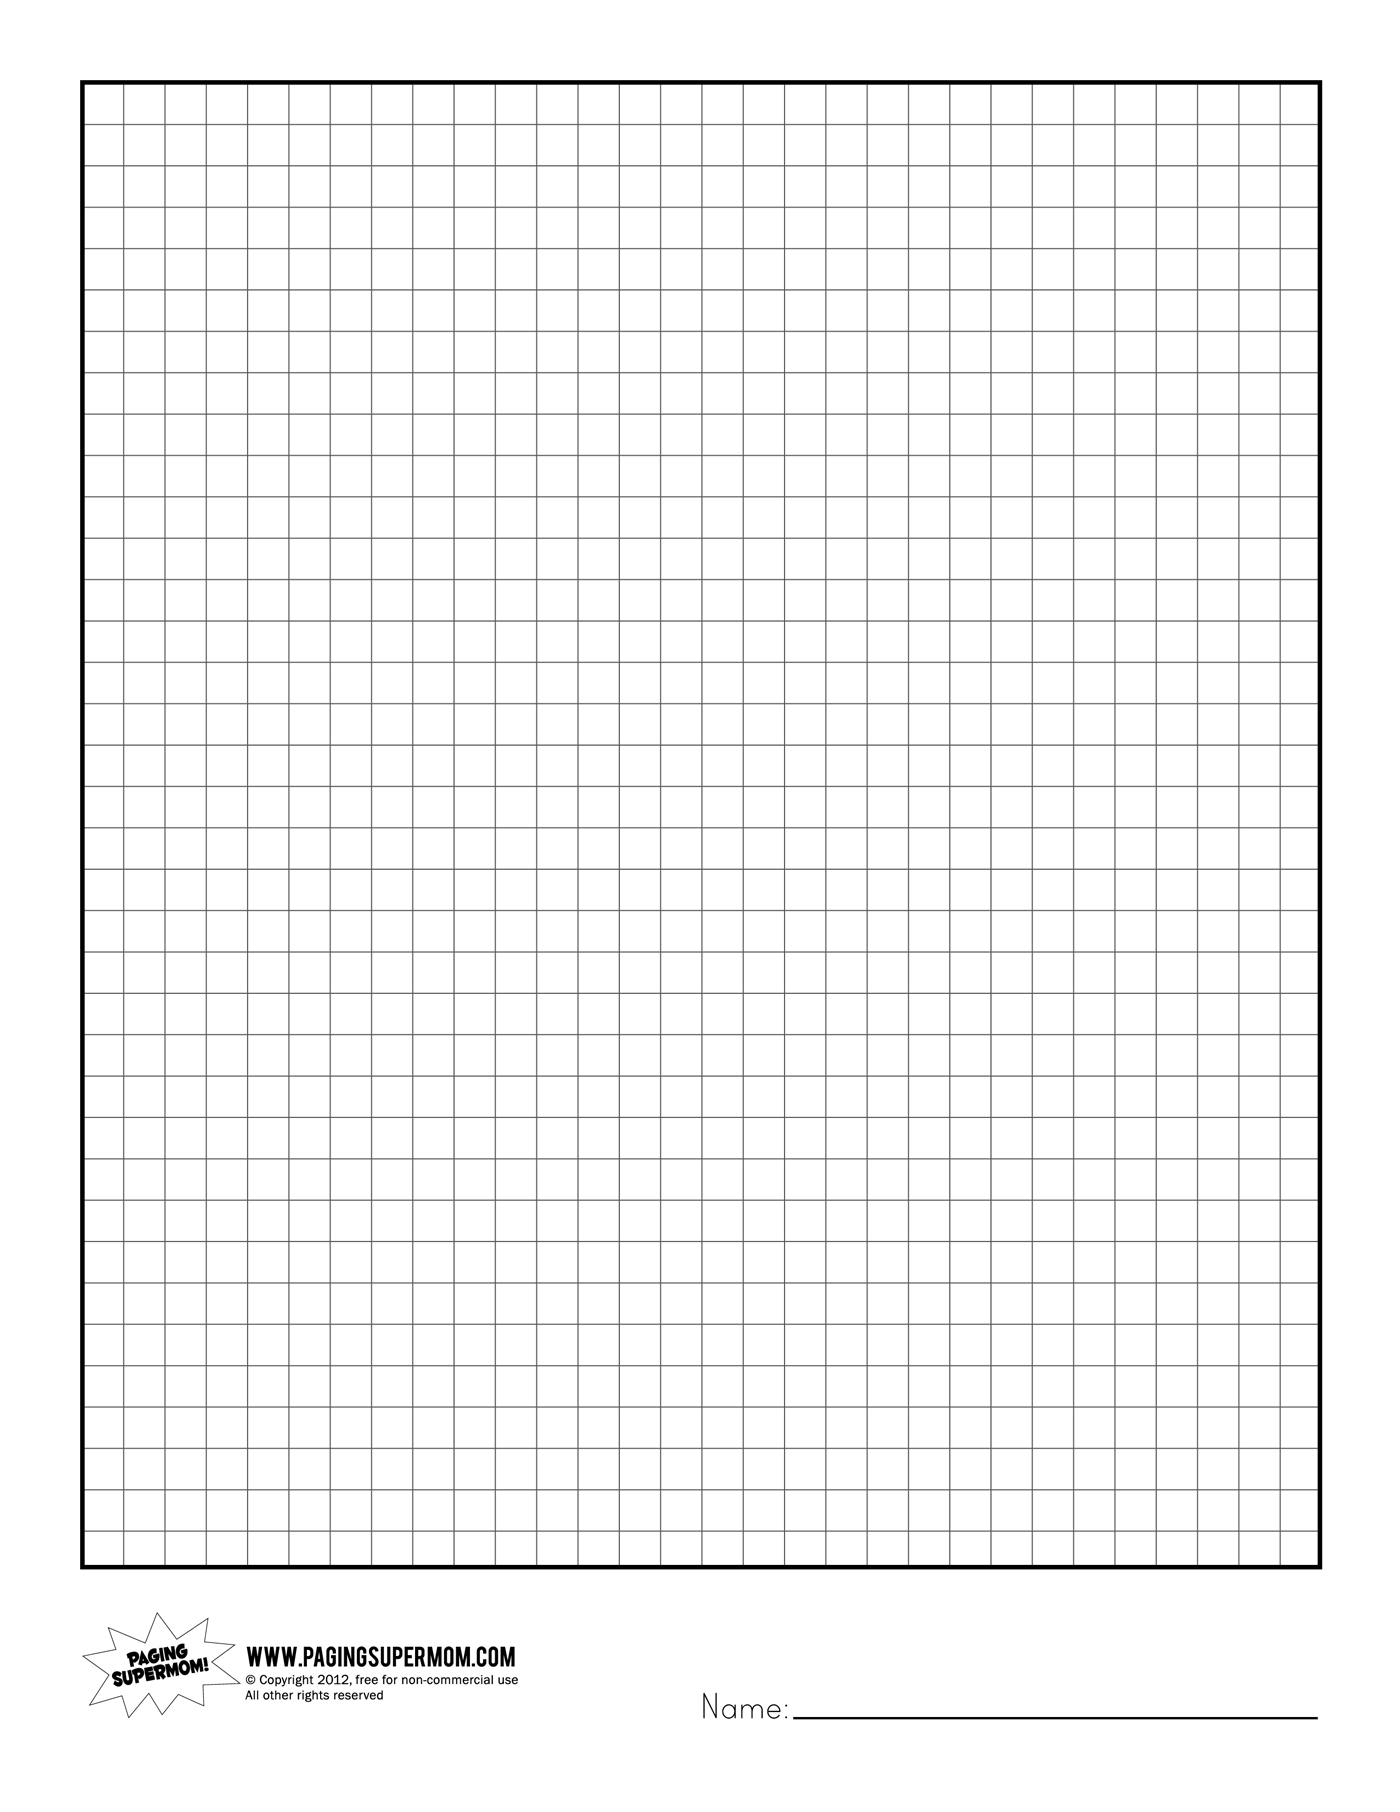 Paper Printable Images Gallery Category Page 1 - printablee.com